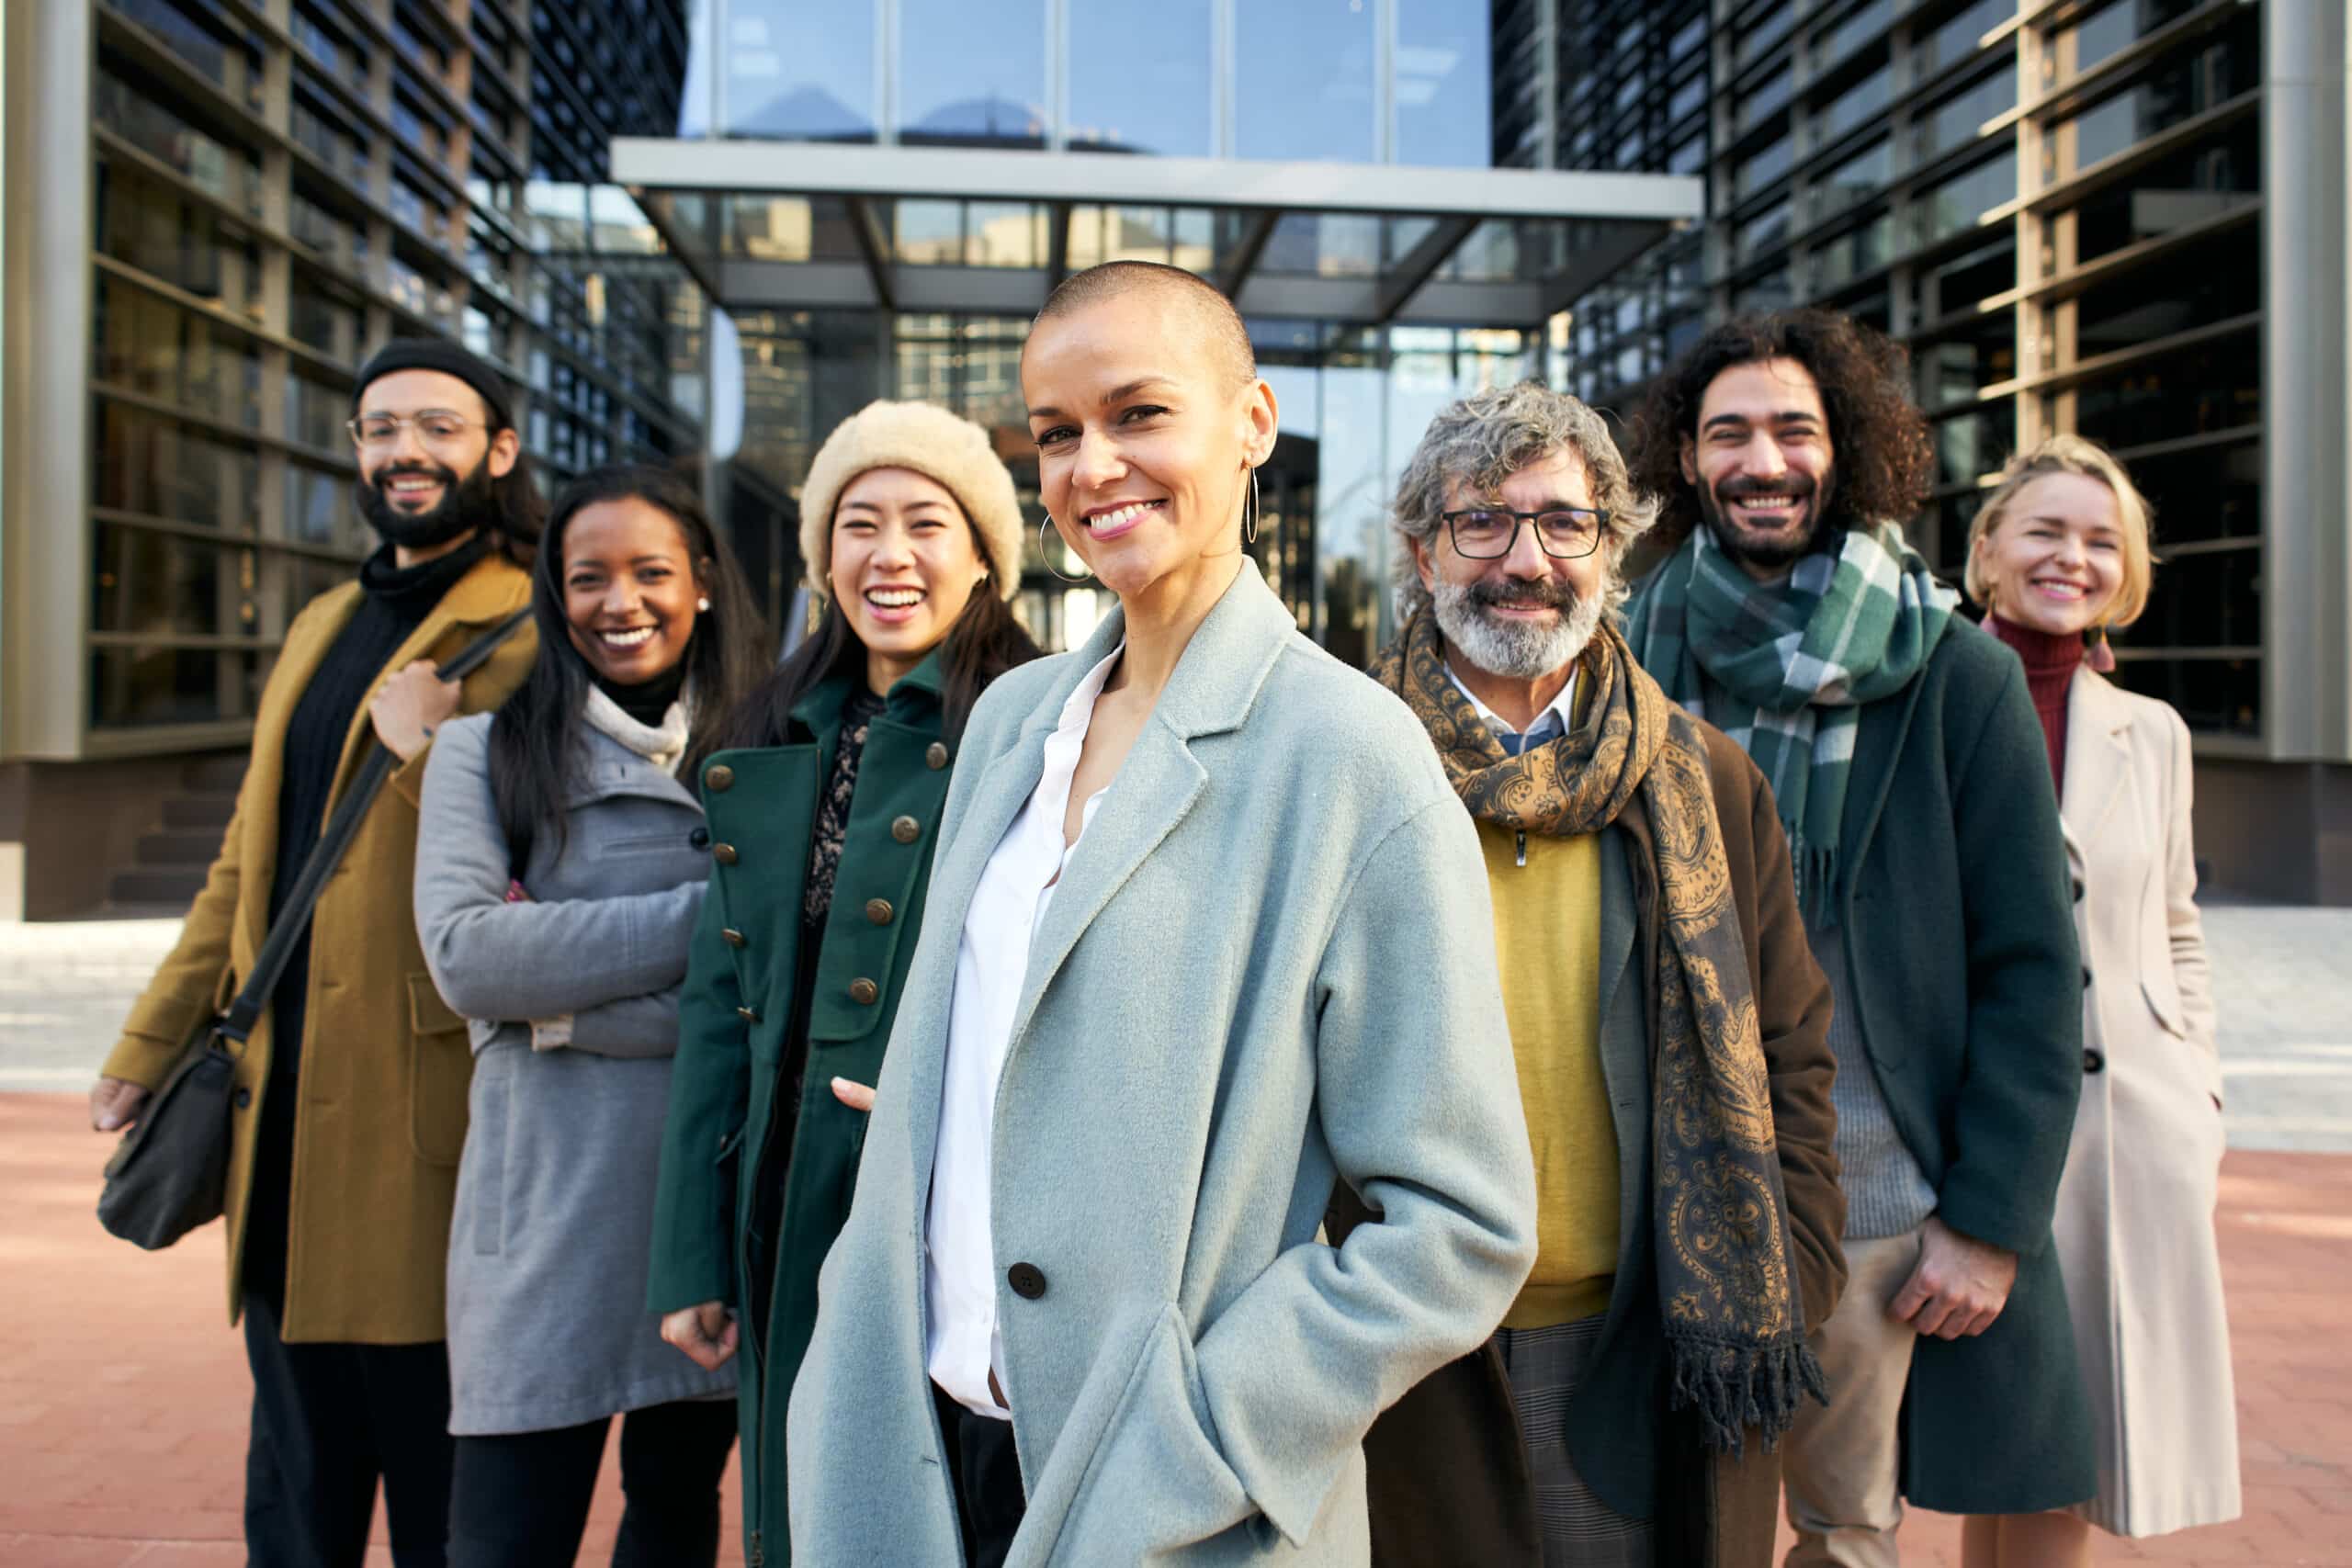 A group of smiling business people from a company led by an empowered shaved air woman Cheerful Looking at camera portrait of a group of happy co-workers of diverse races and ages